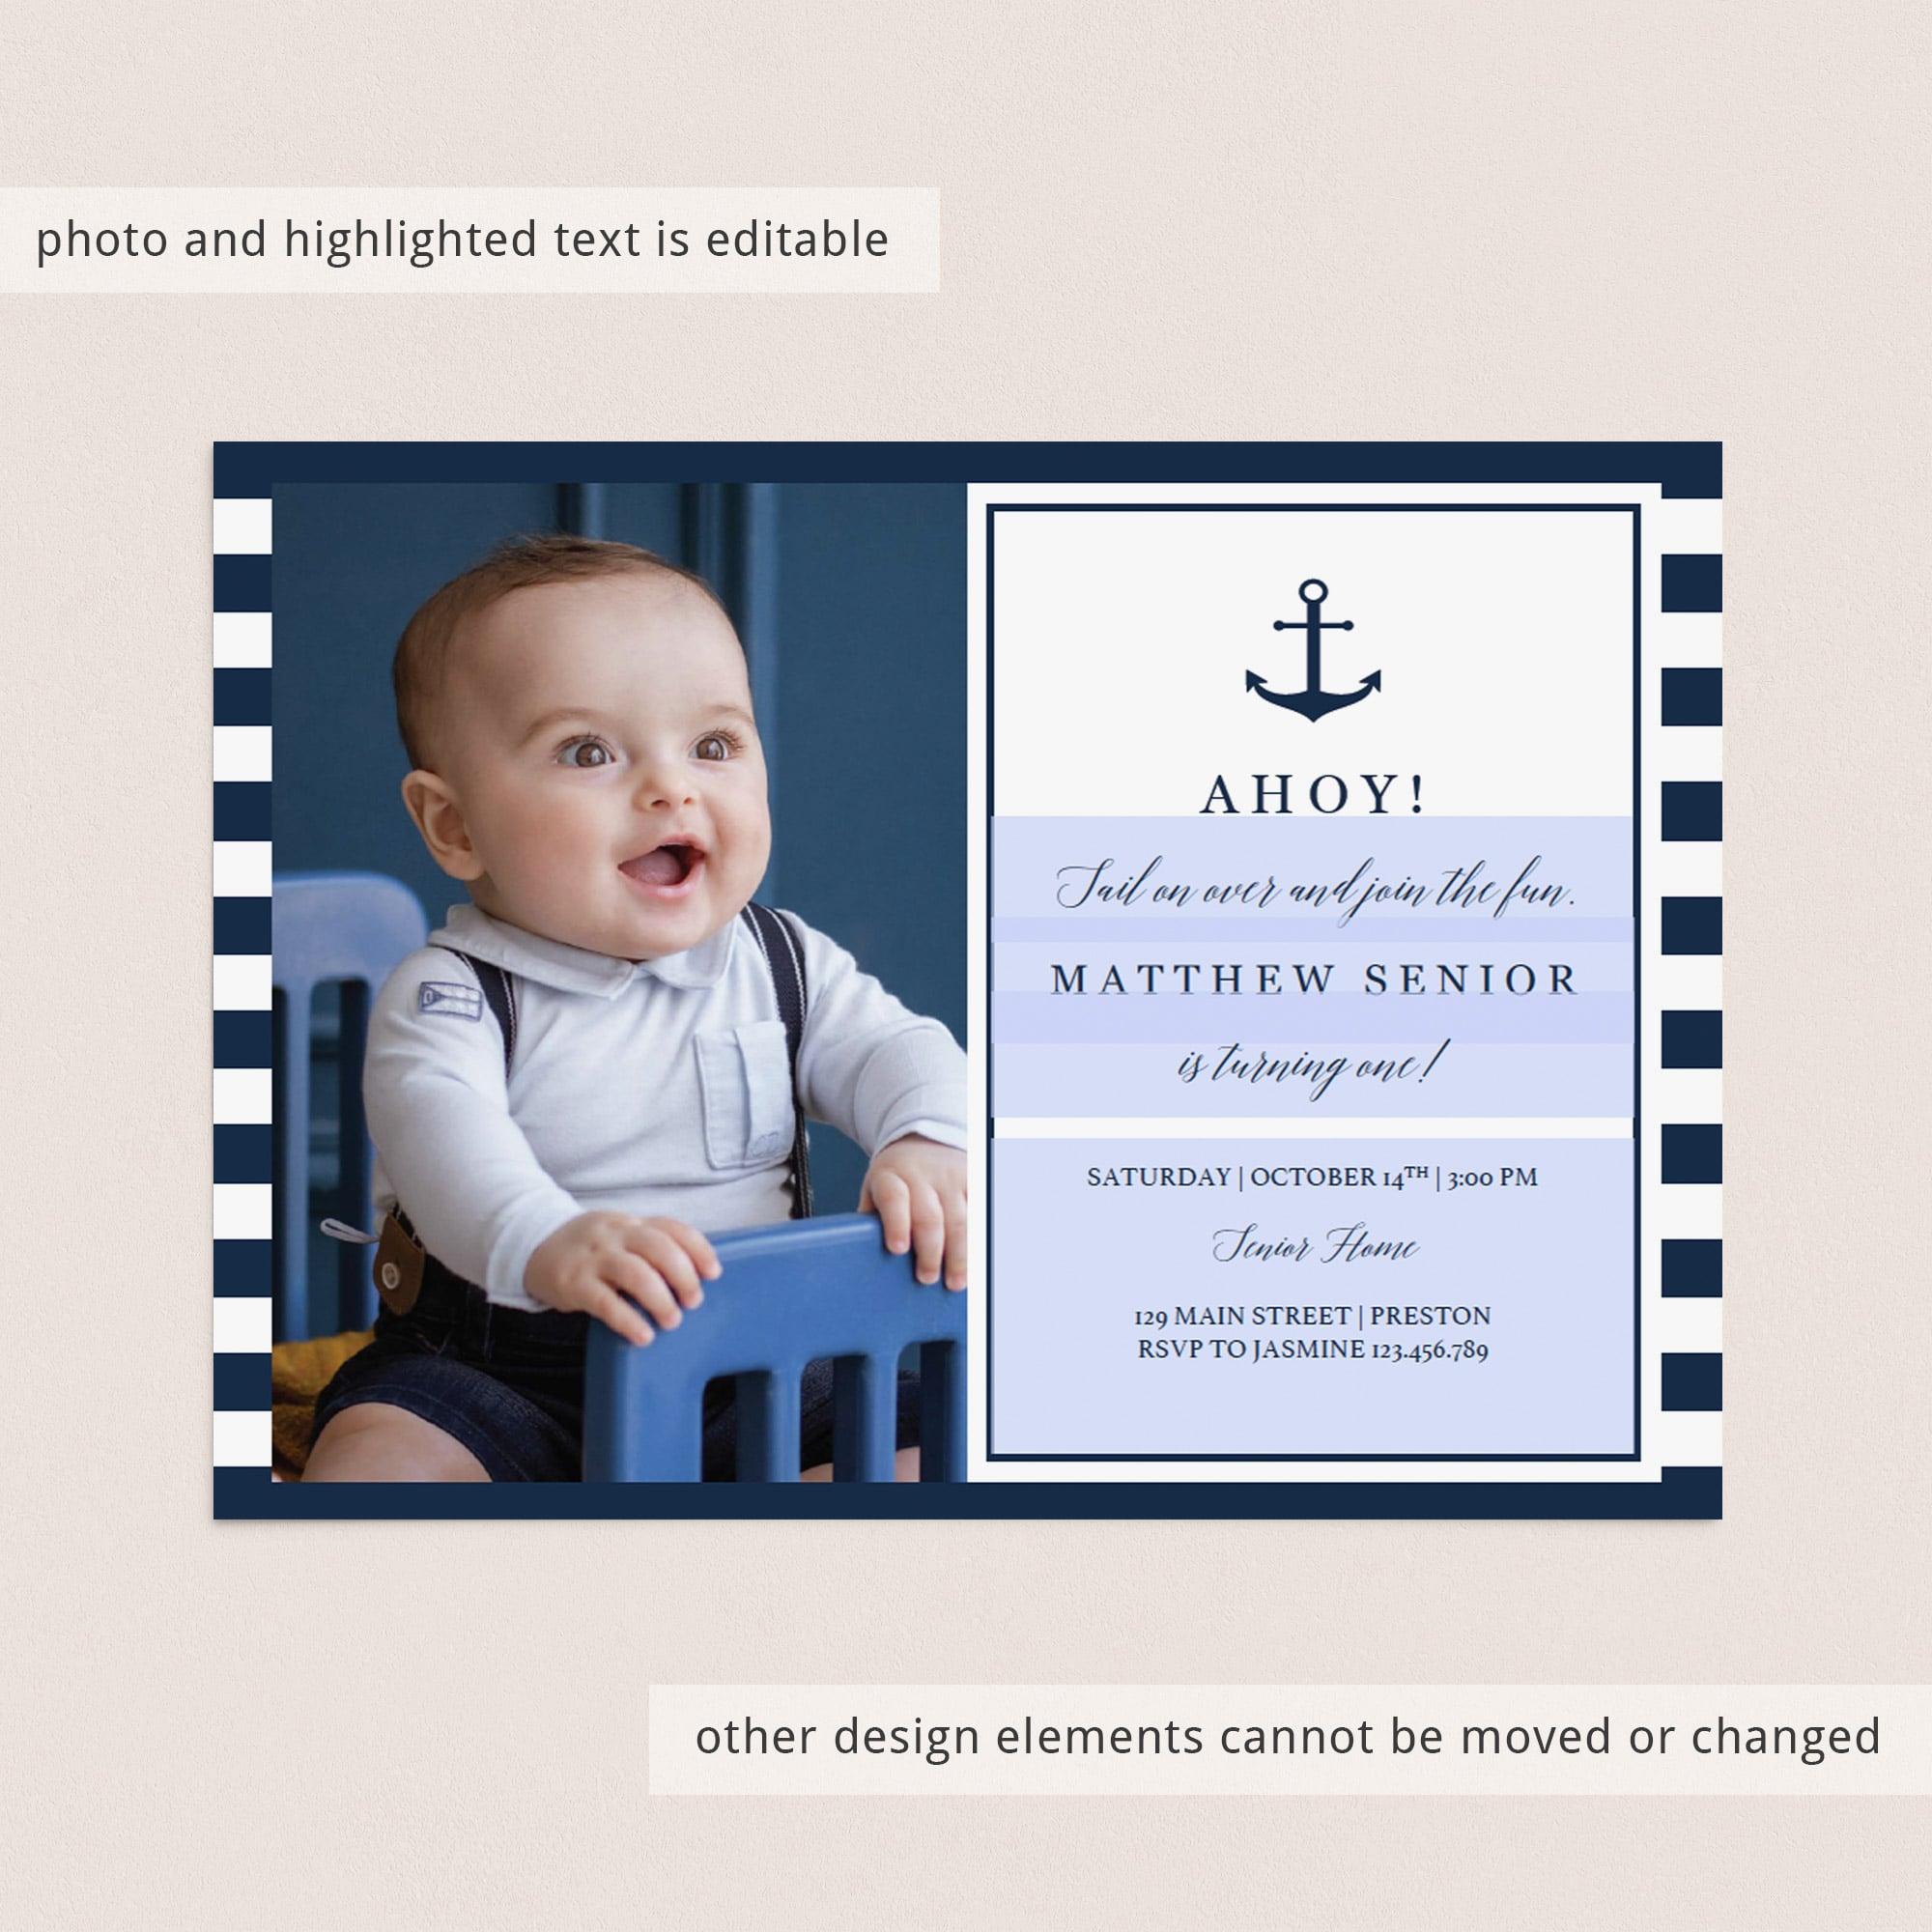 Ahoy birthday party invitation with photo by LittleSizzle